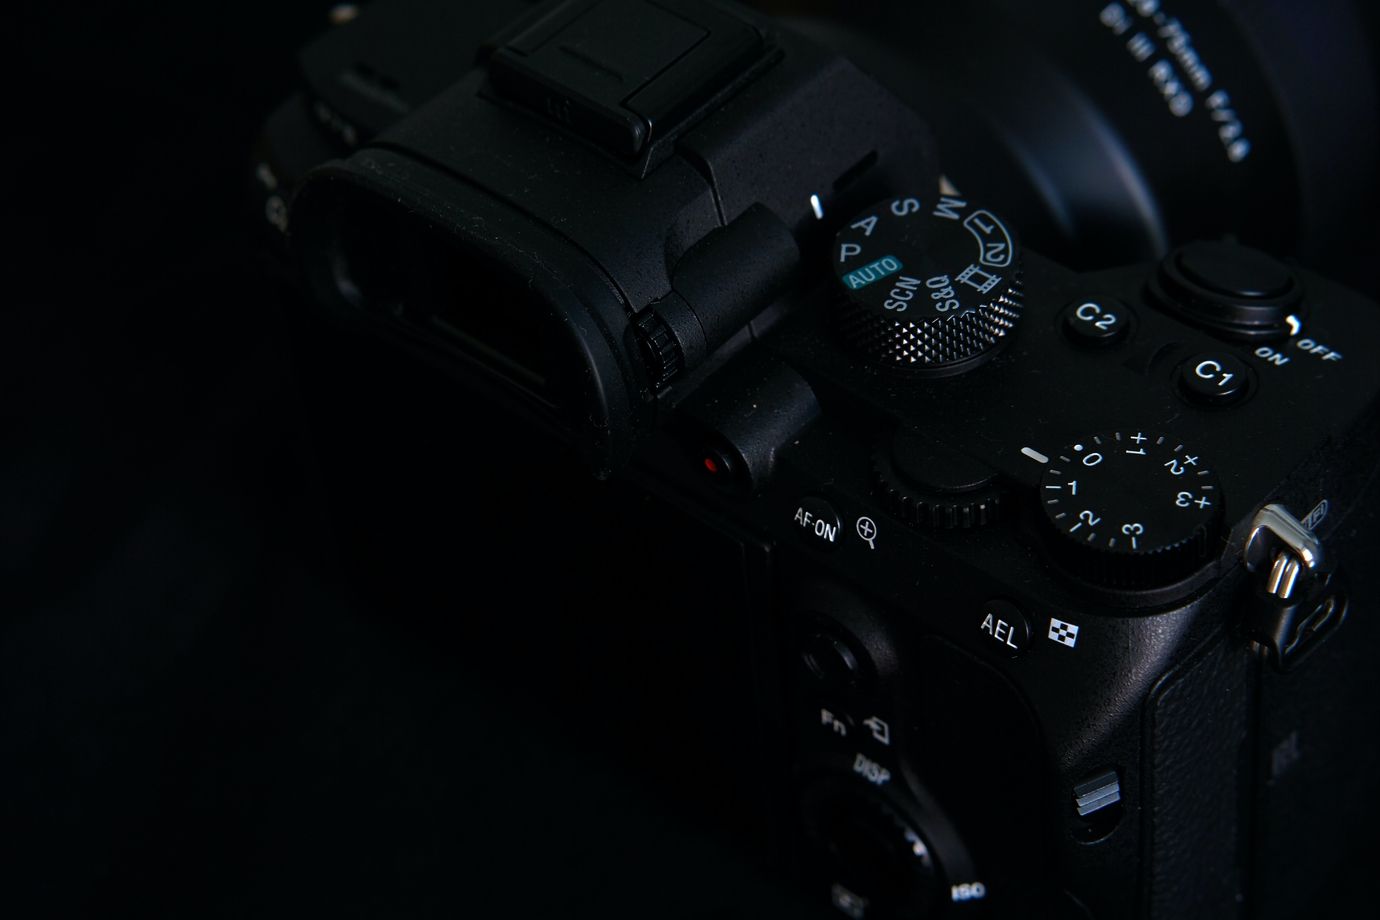 mirrorless cameras pros cons best top list guide comparison